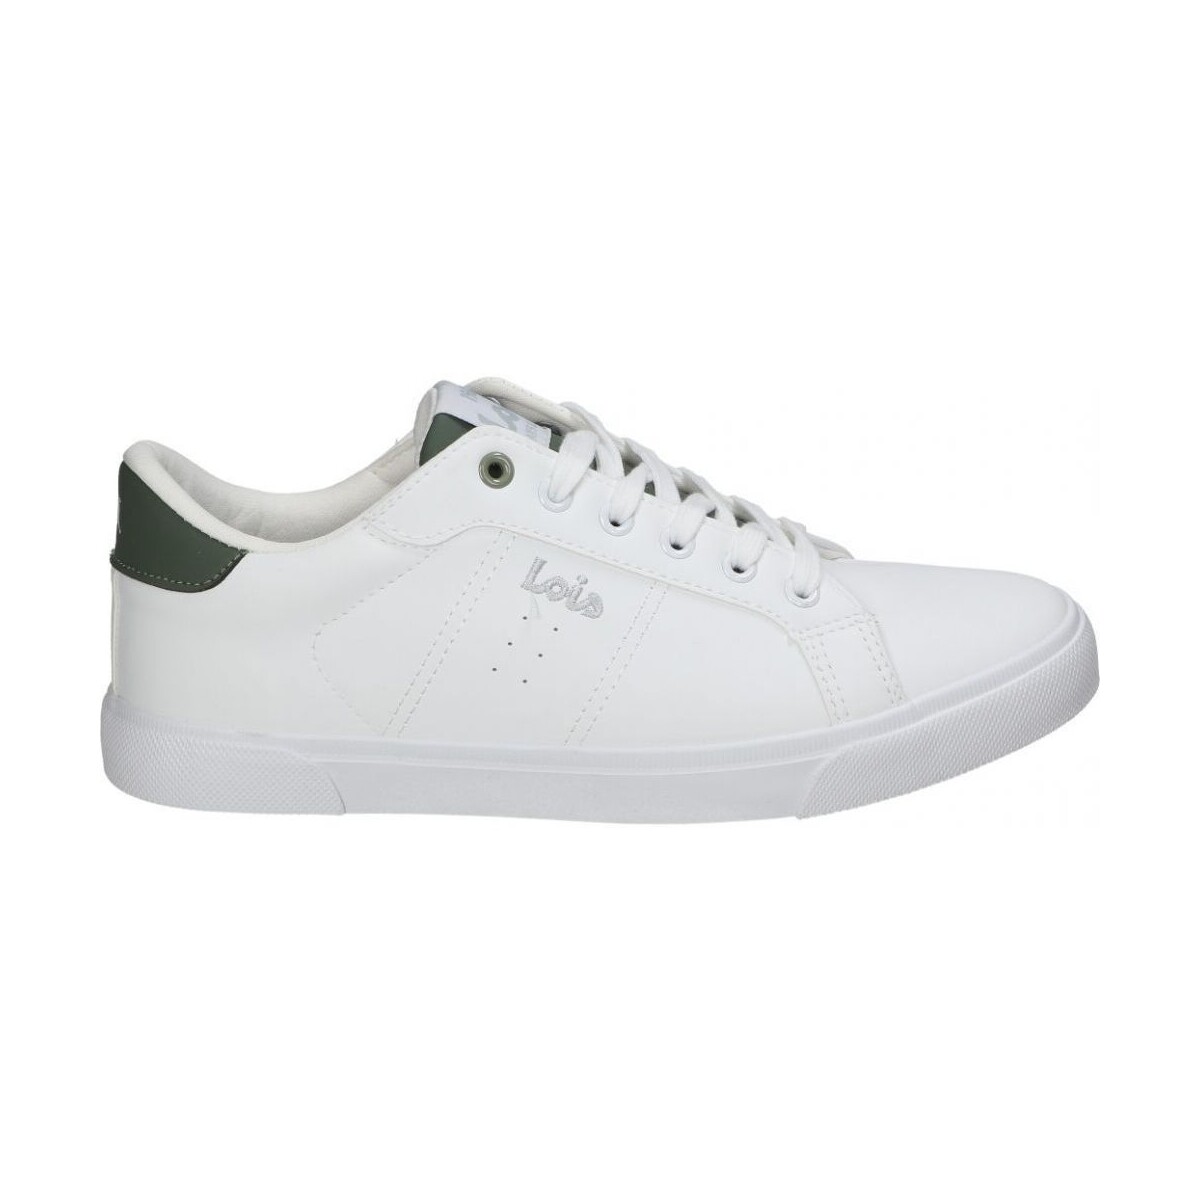 Chaussures Homme Multisport Lois 61346 Blanc